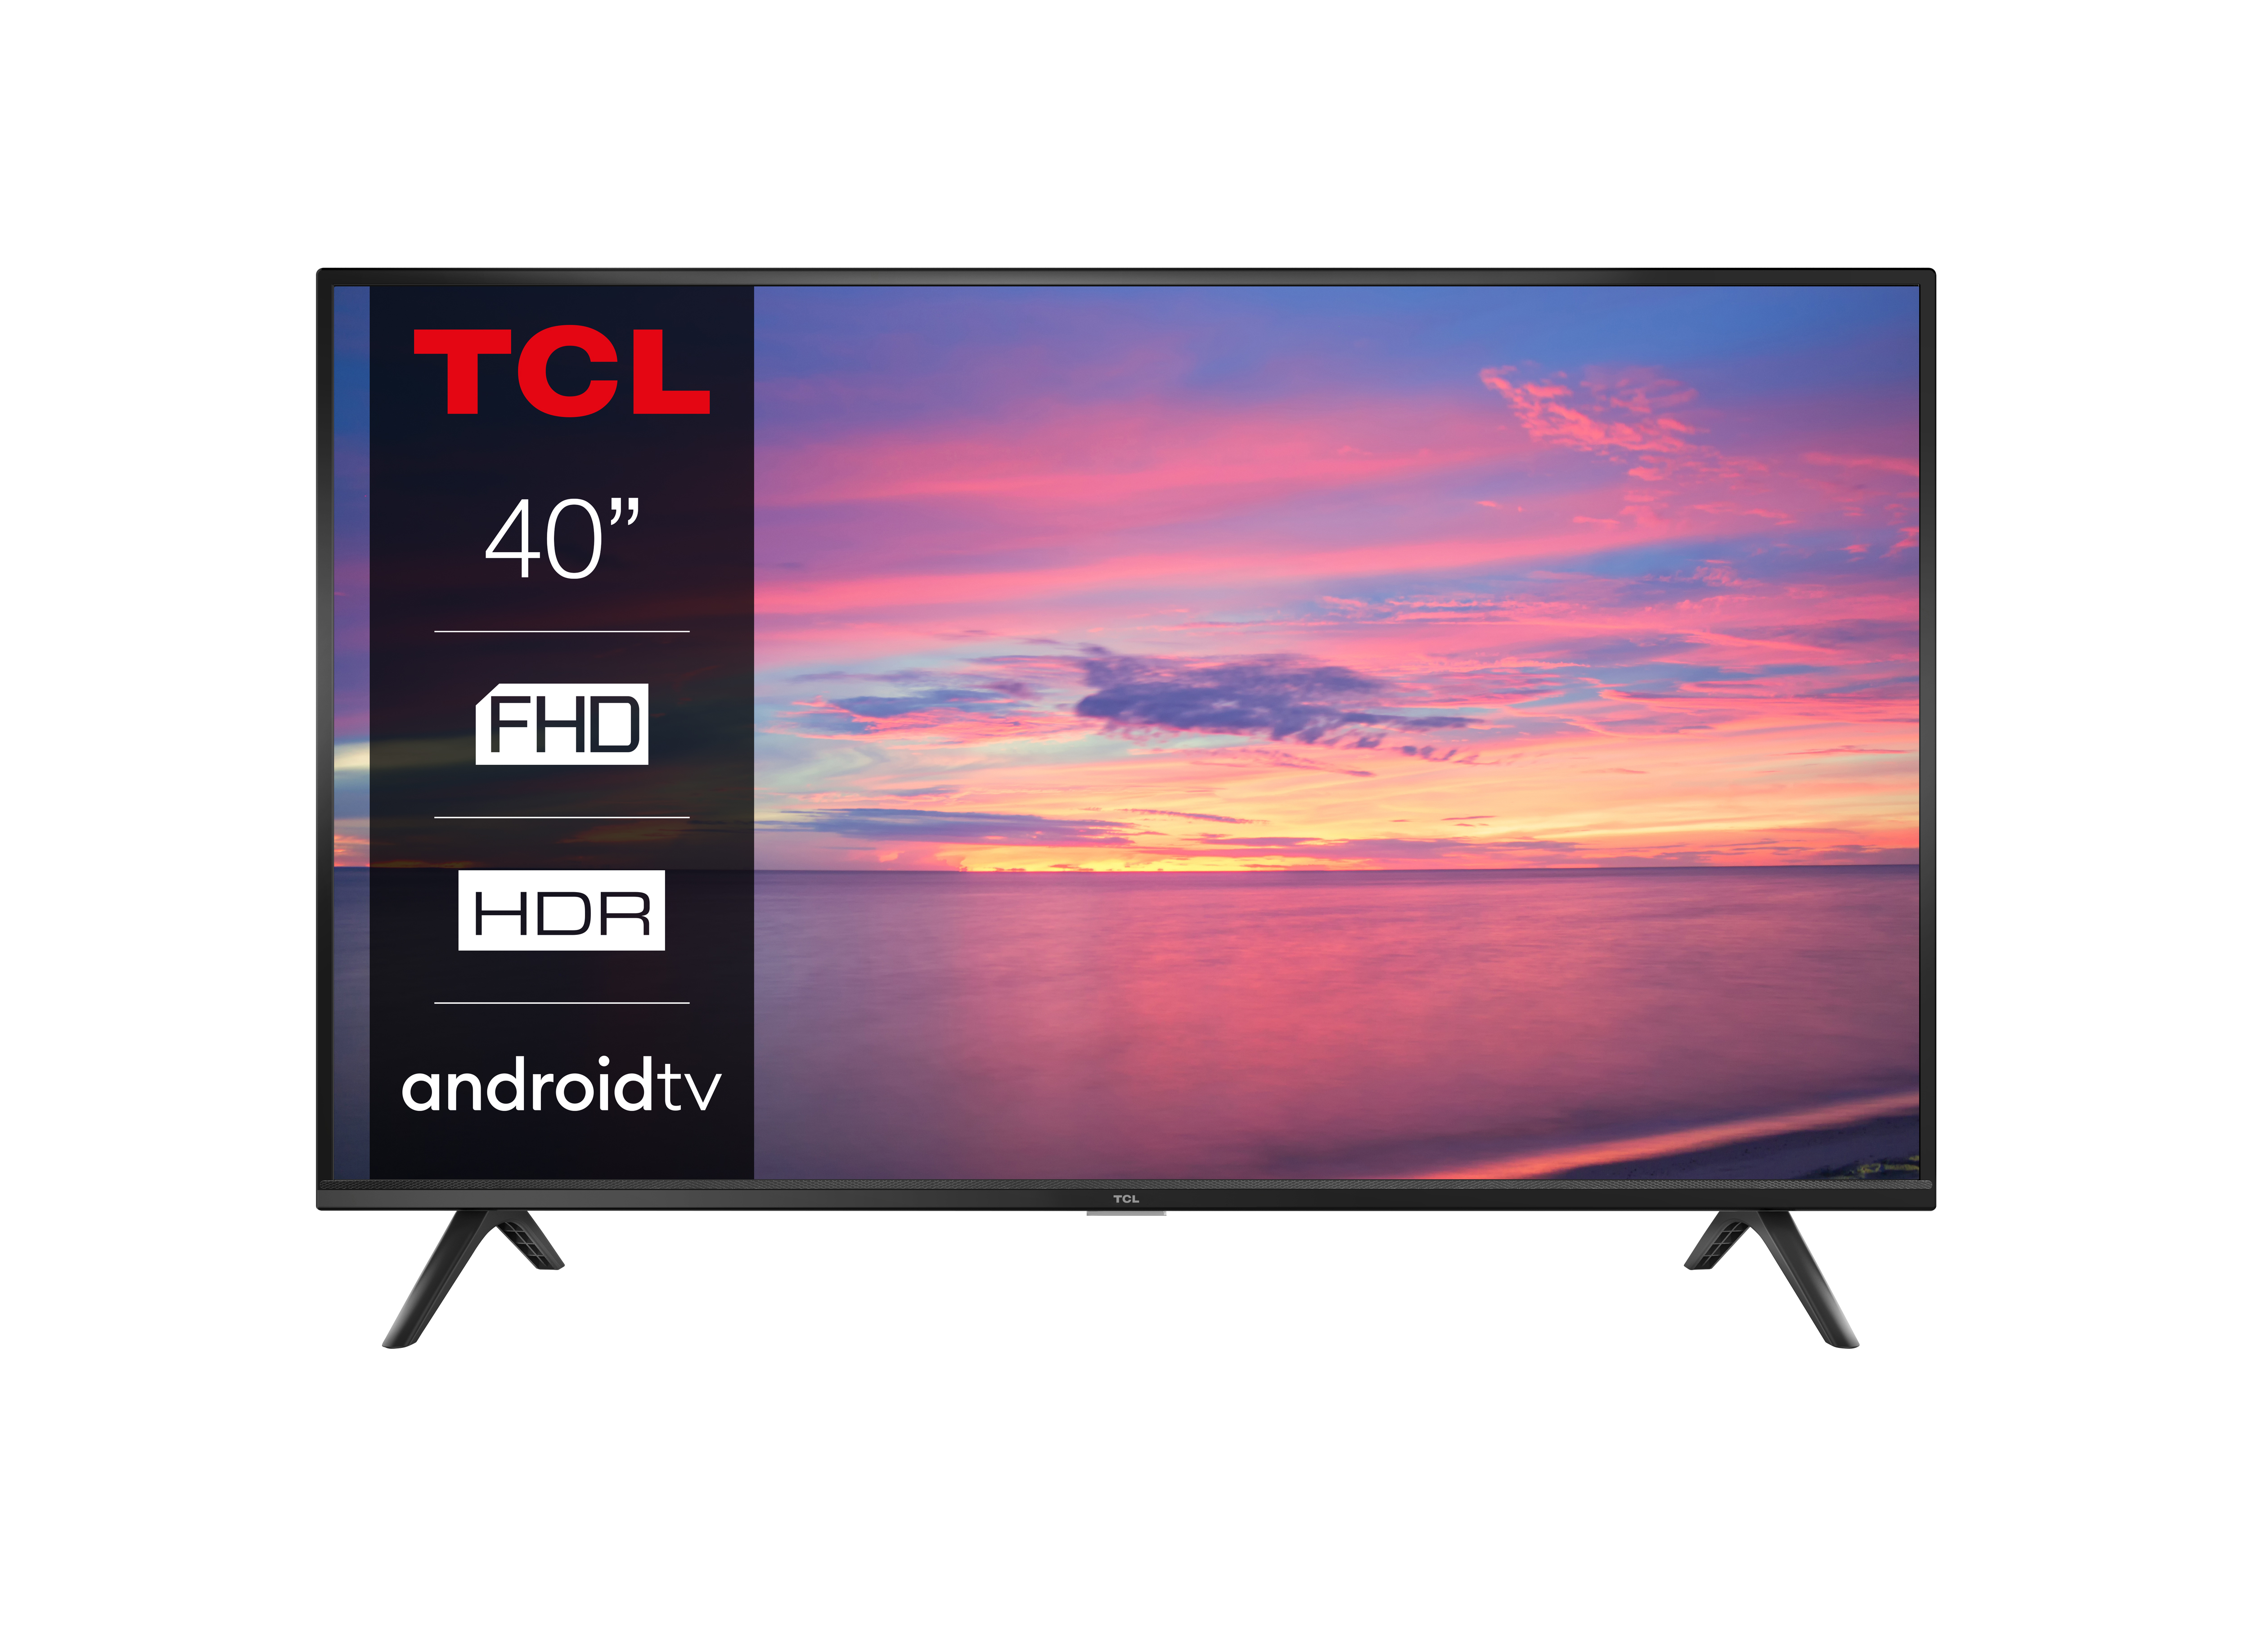 TCL S52 Series 40S5200 TV